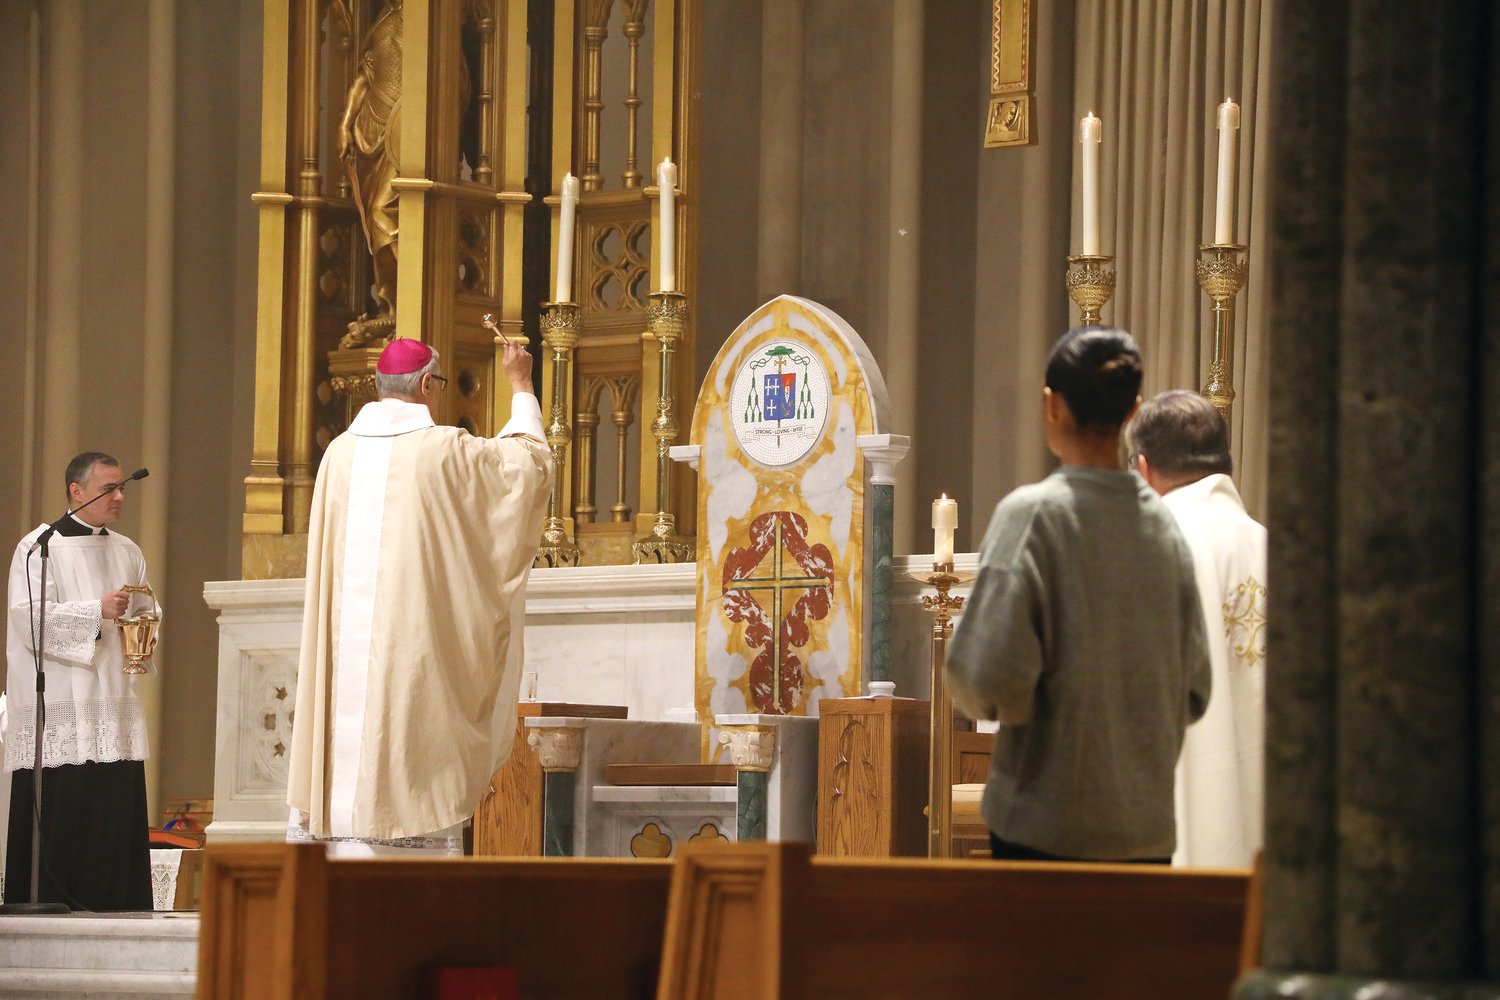 On Sunday, June 19, 2022, the Solemnity of Corpus Christi, Bishop Thomas J. Tobin blessed a newly installed marble cathedra at the Cathedral of SS. Peter and Paul. It serves as the symbol of a bishop’s role as shepherd and teacher of all Catholics in the diocese.